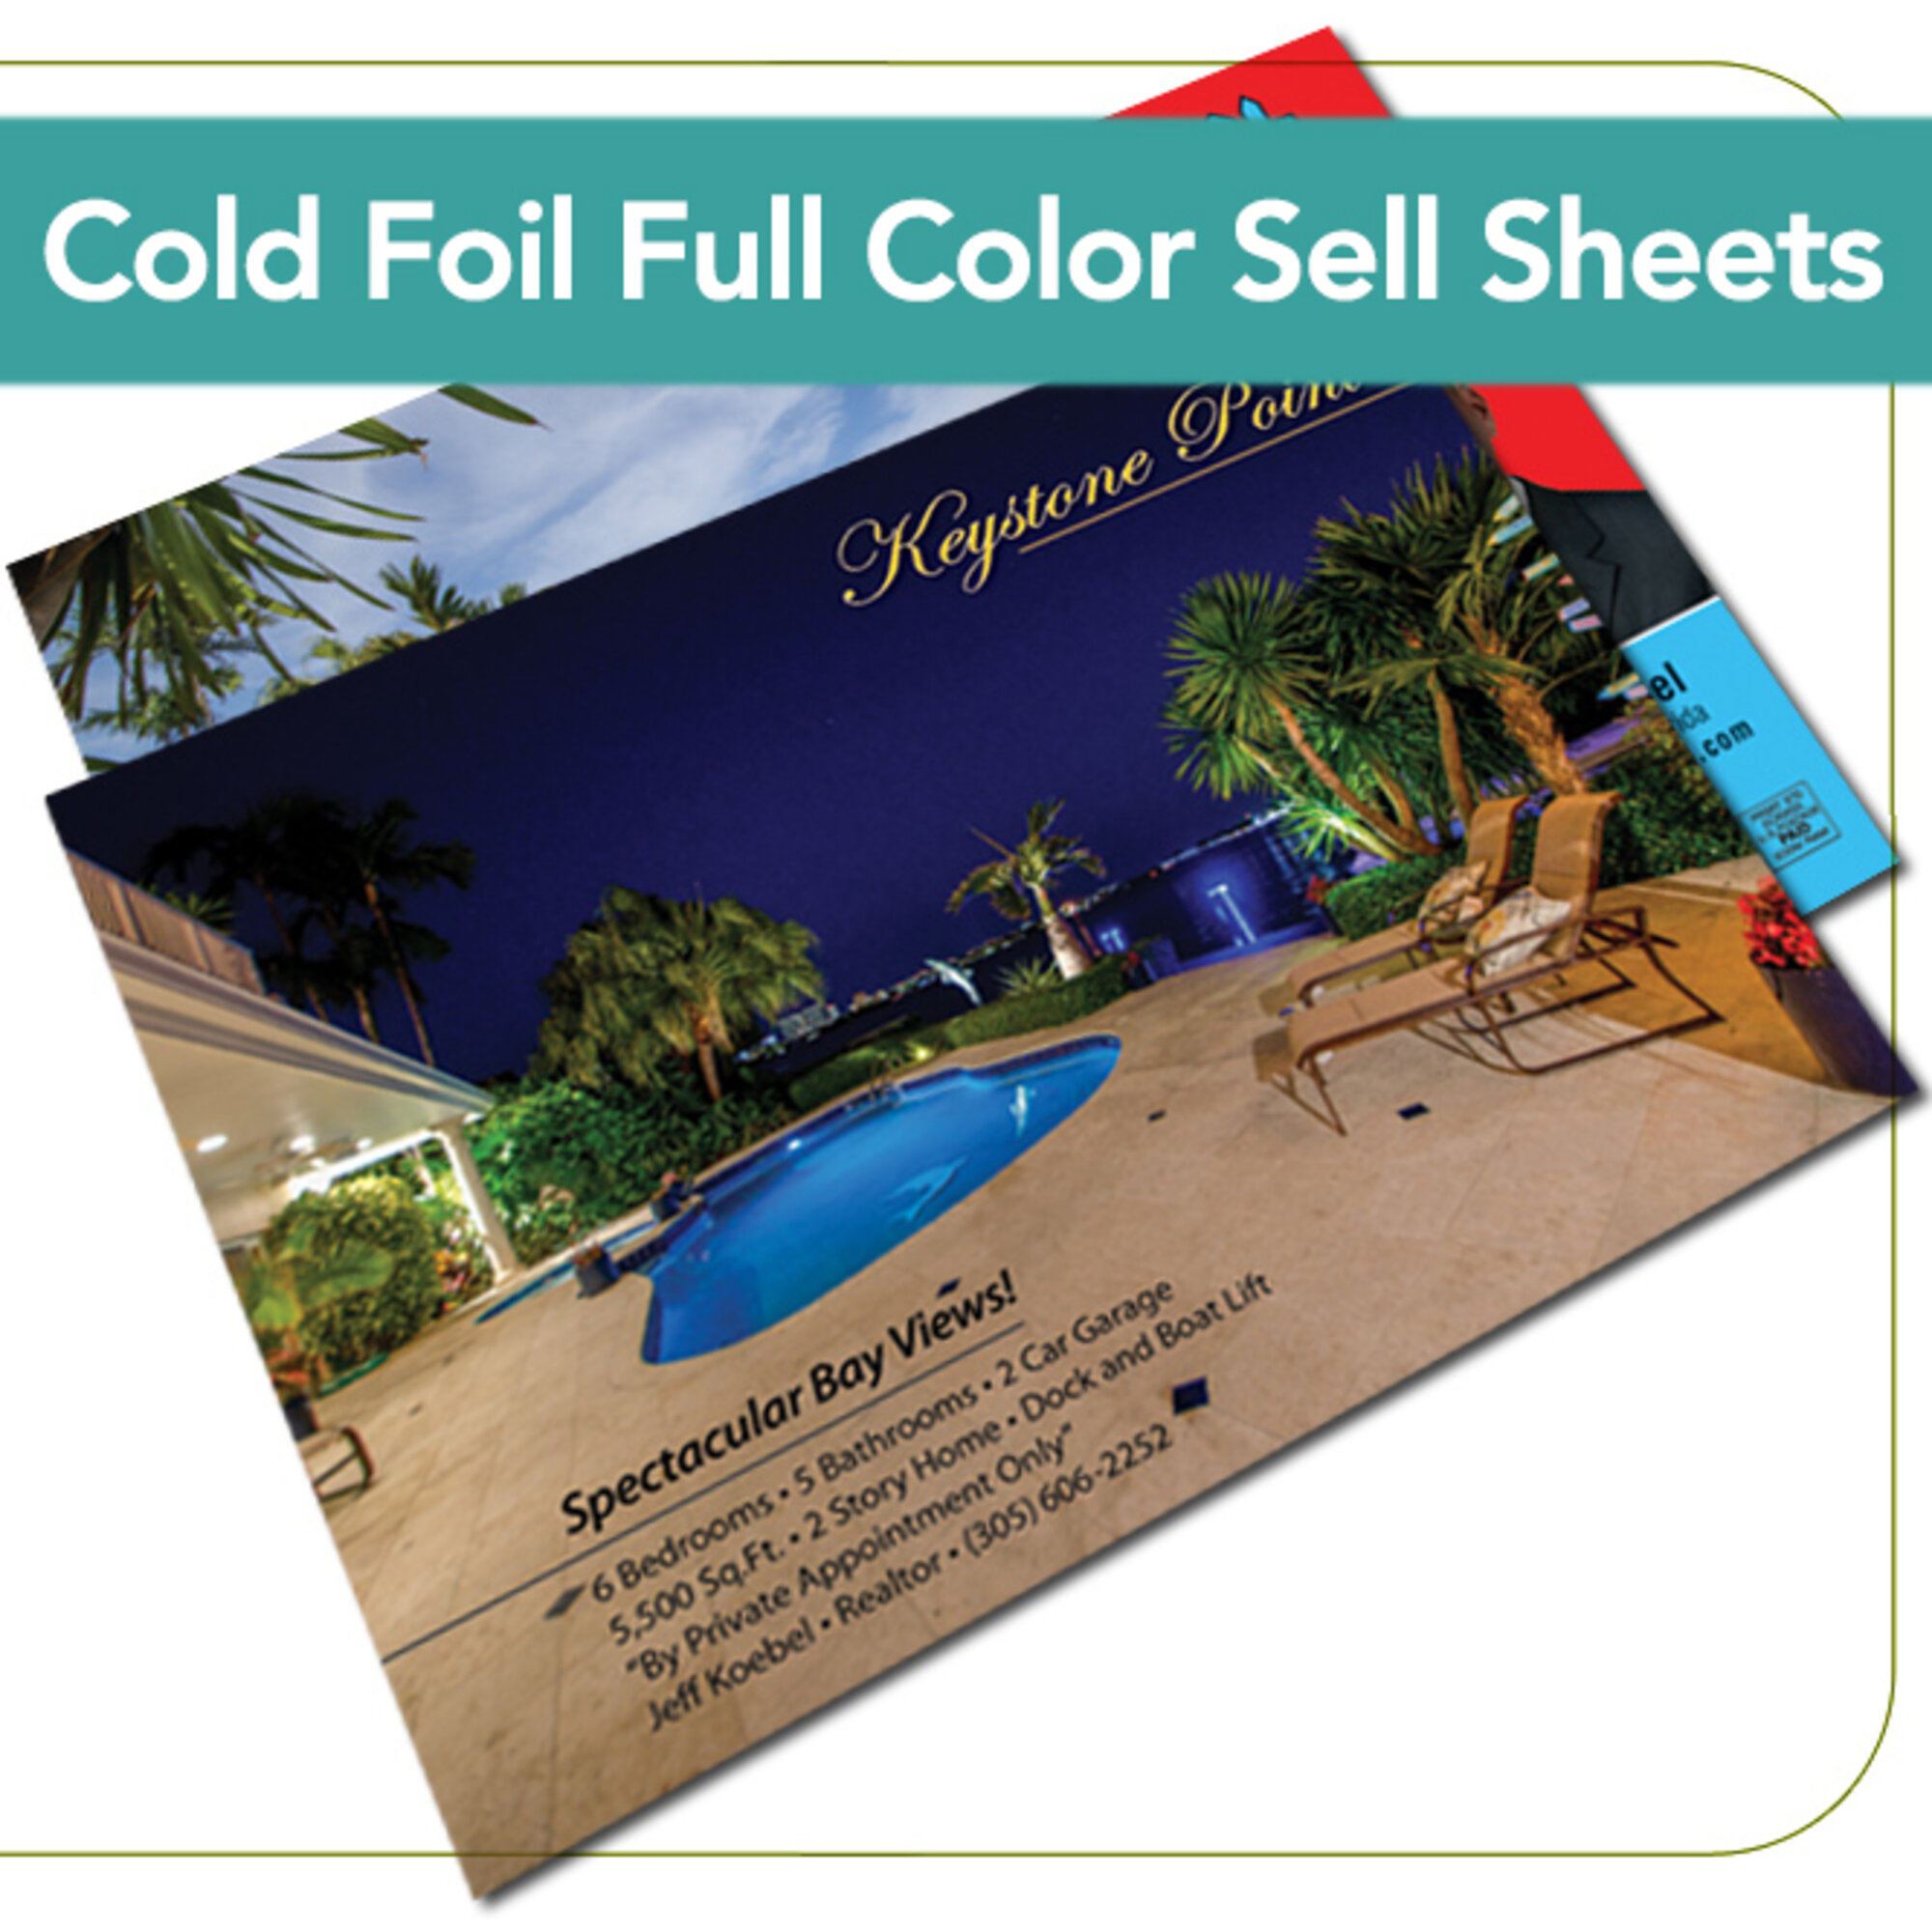 Cold Foil Full Color Sell Sheets